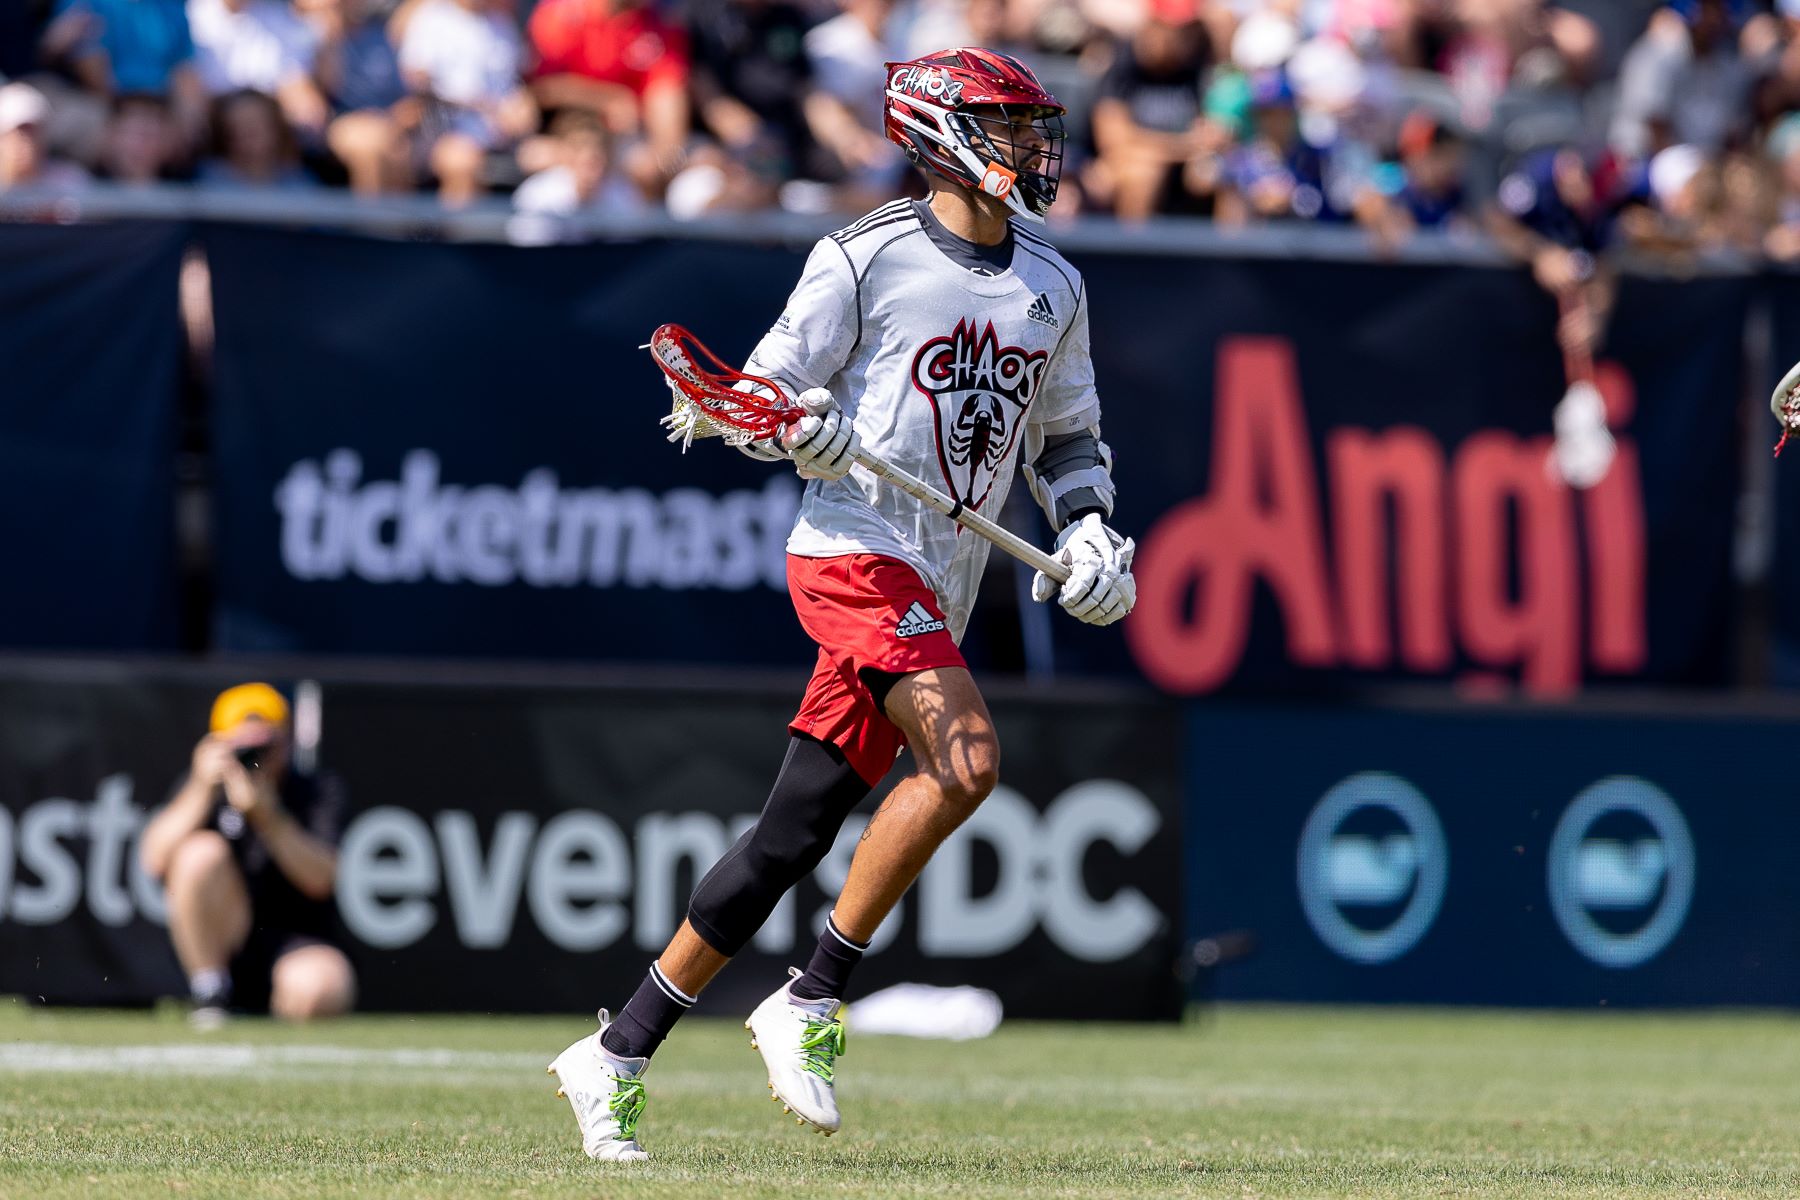 Chaos midfielder Dhane Smith plays in the Premier Lacrosse League championship game against the Whipsnakes at Audi Field